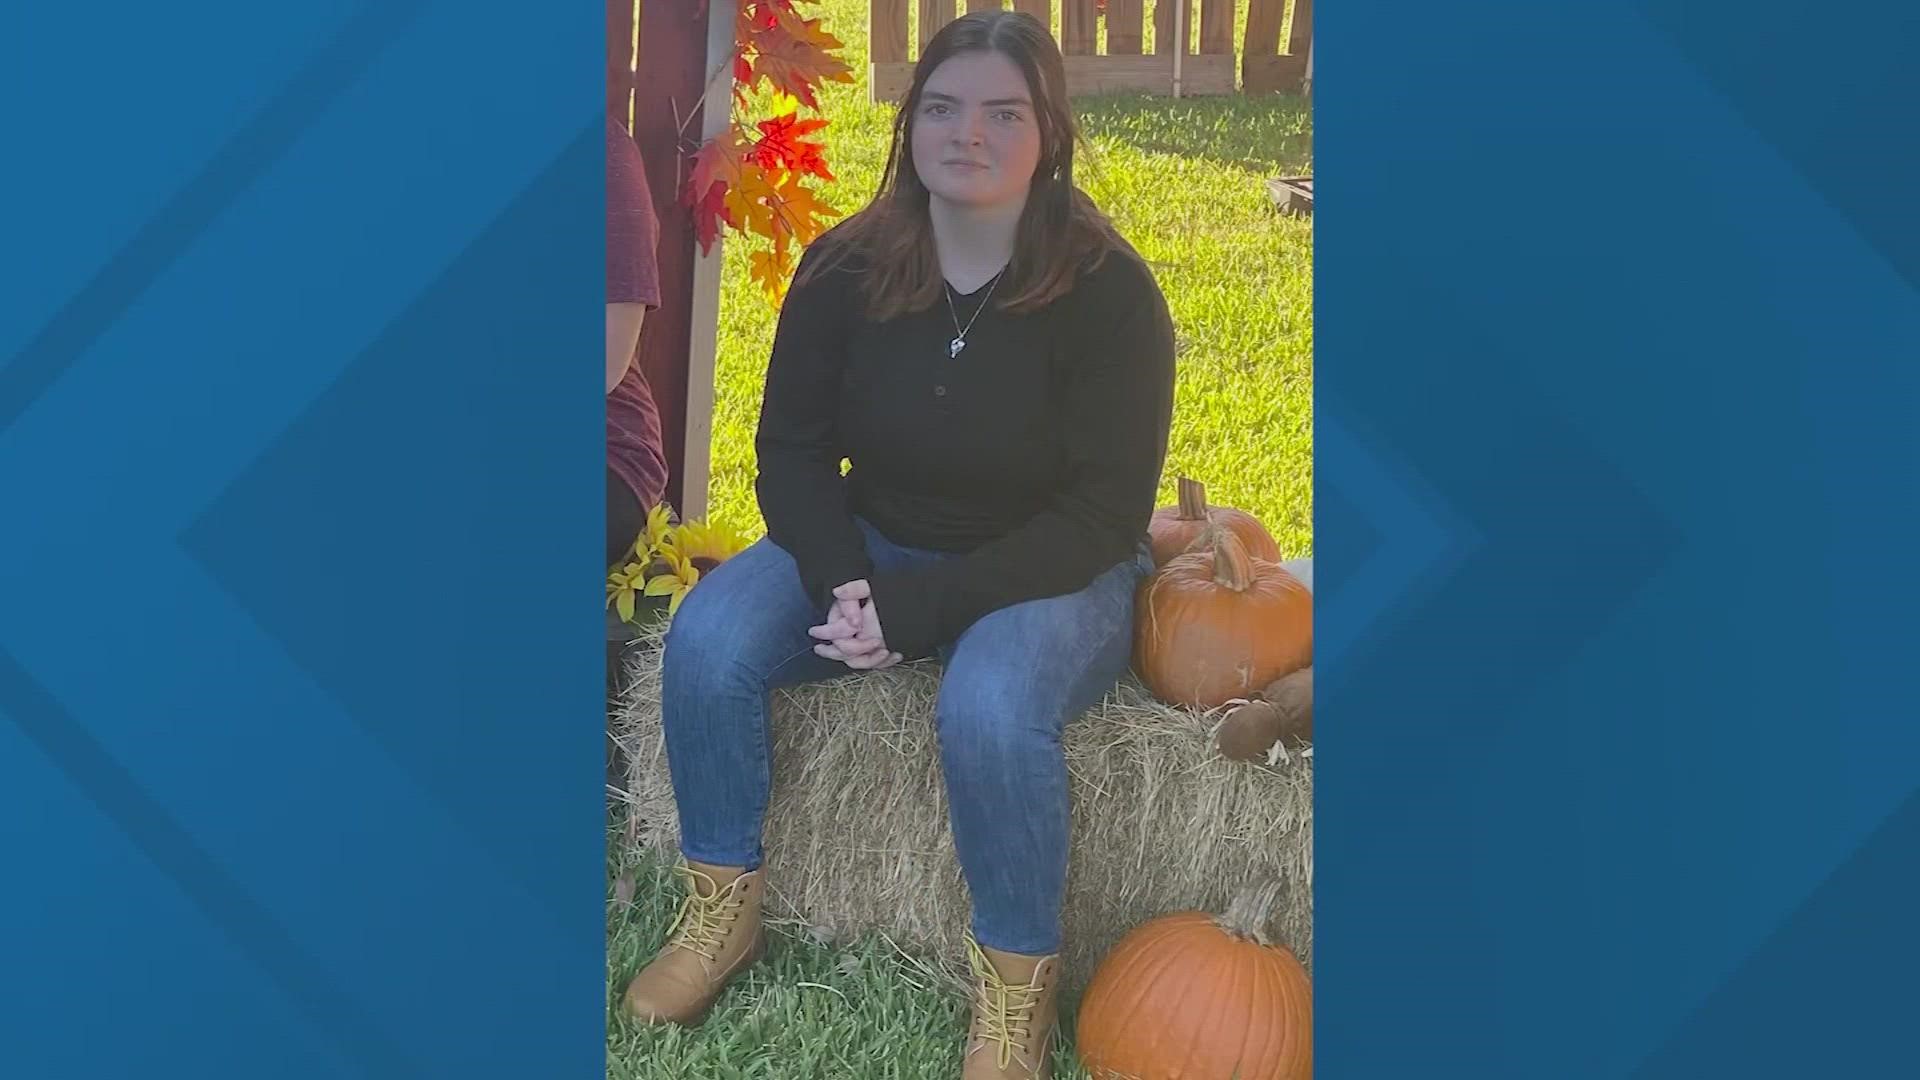 For nearly a week now, Tracy Byrd has spent her days looking for her 17-year-old daughter Zoe Templeton. Zoe has been missing since Oct. 17.